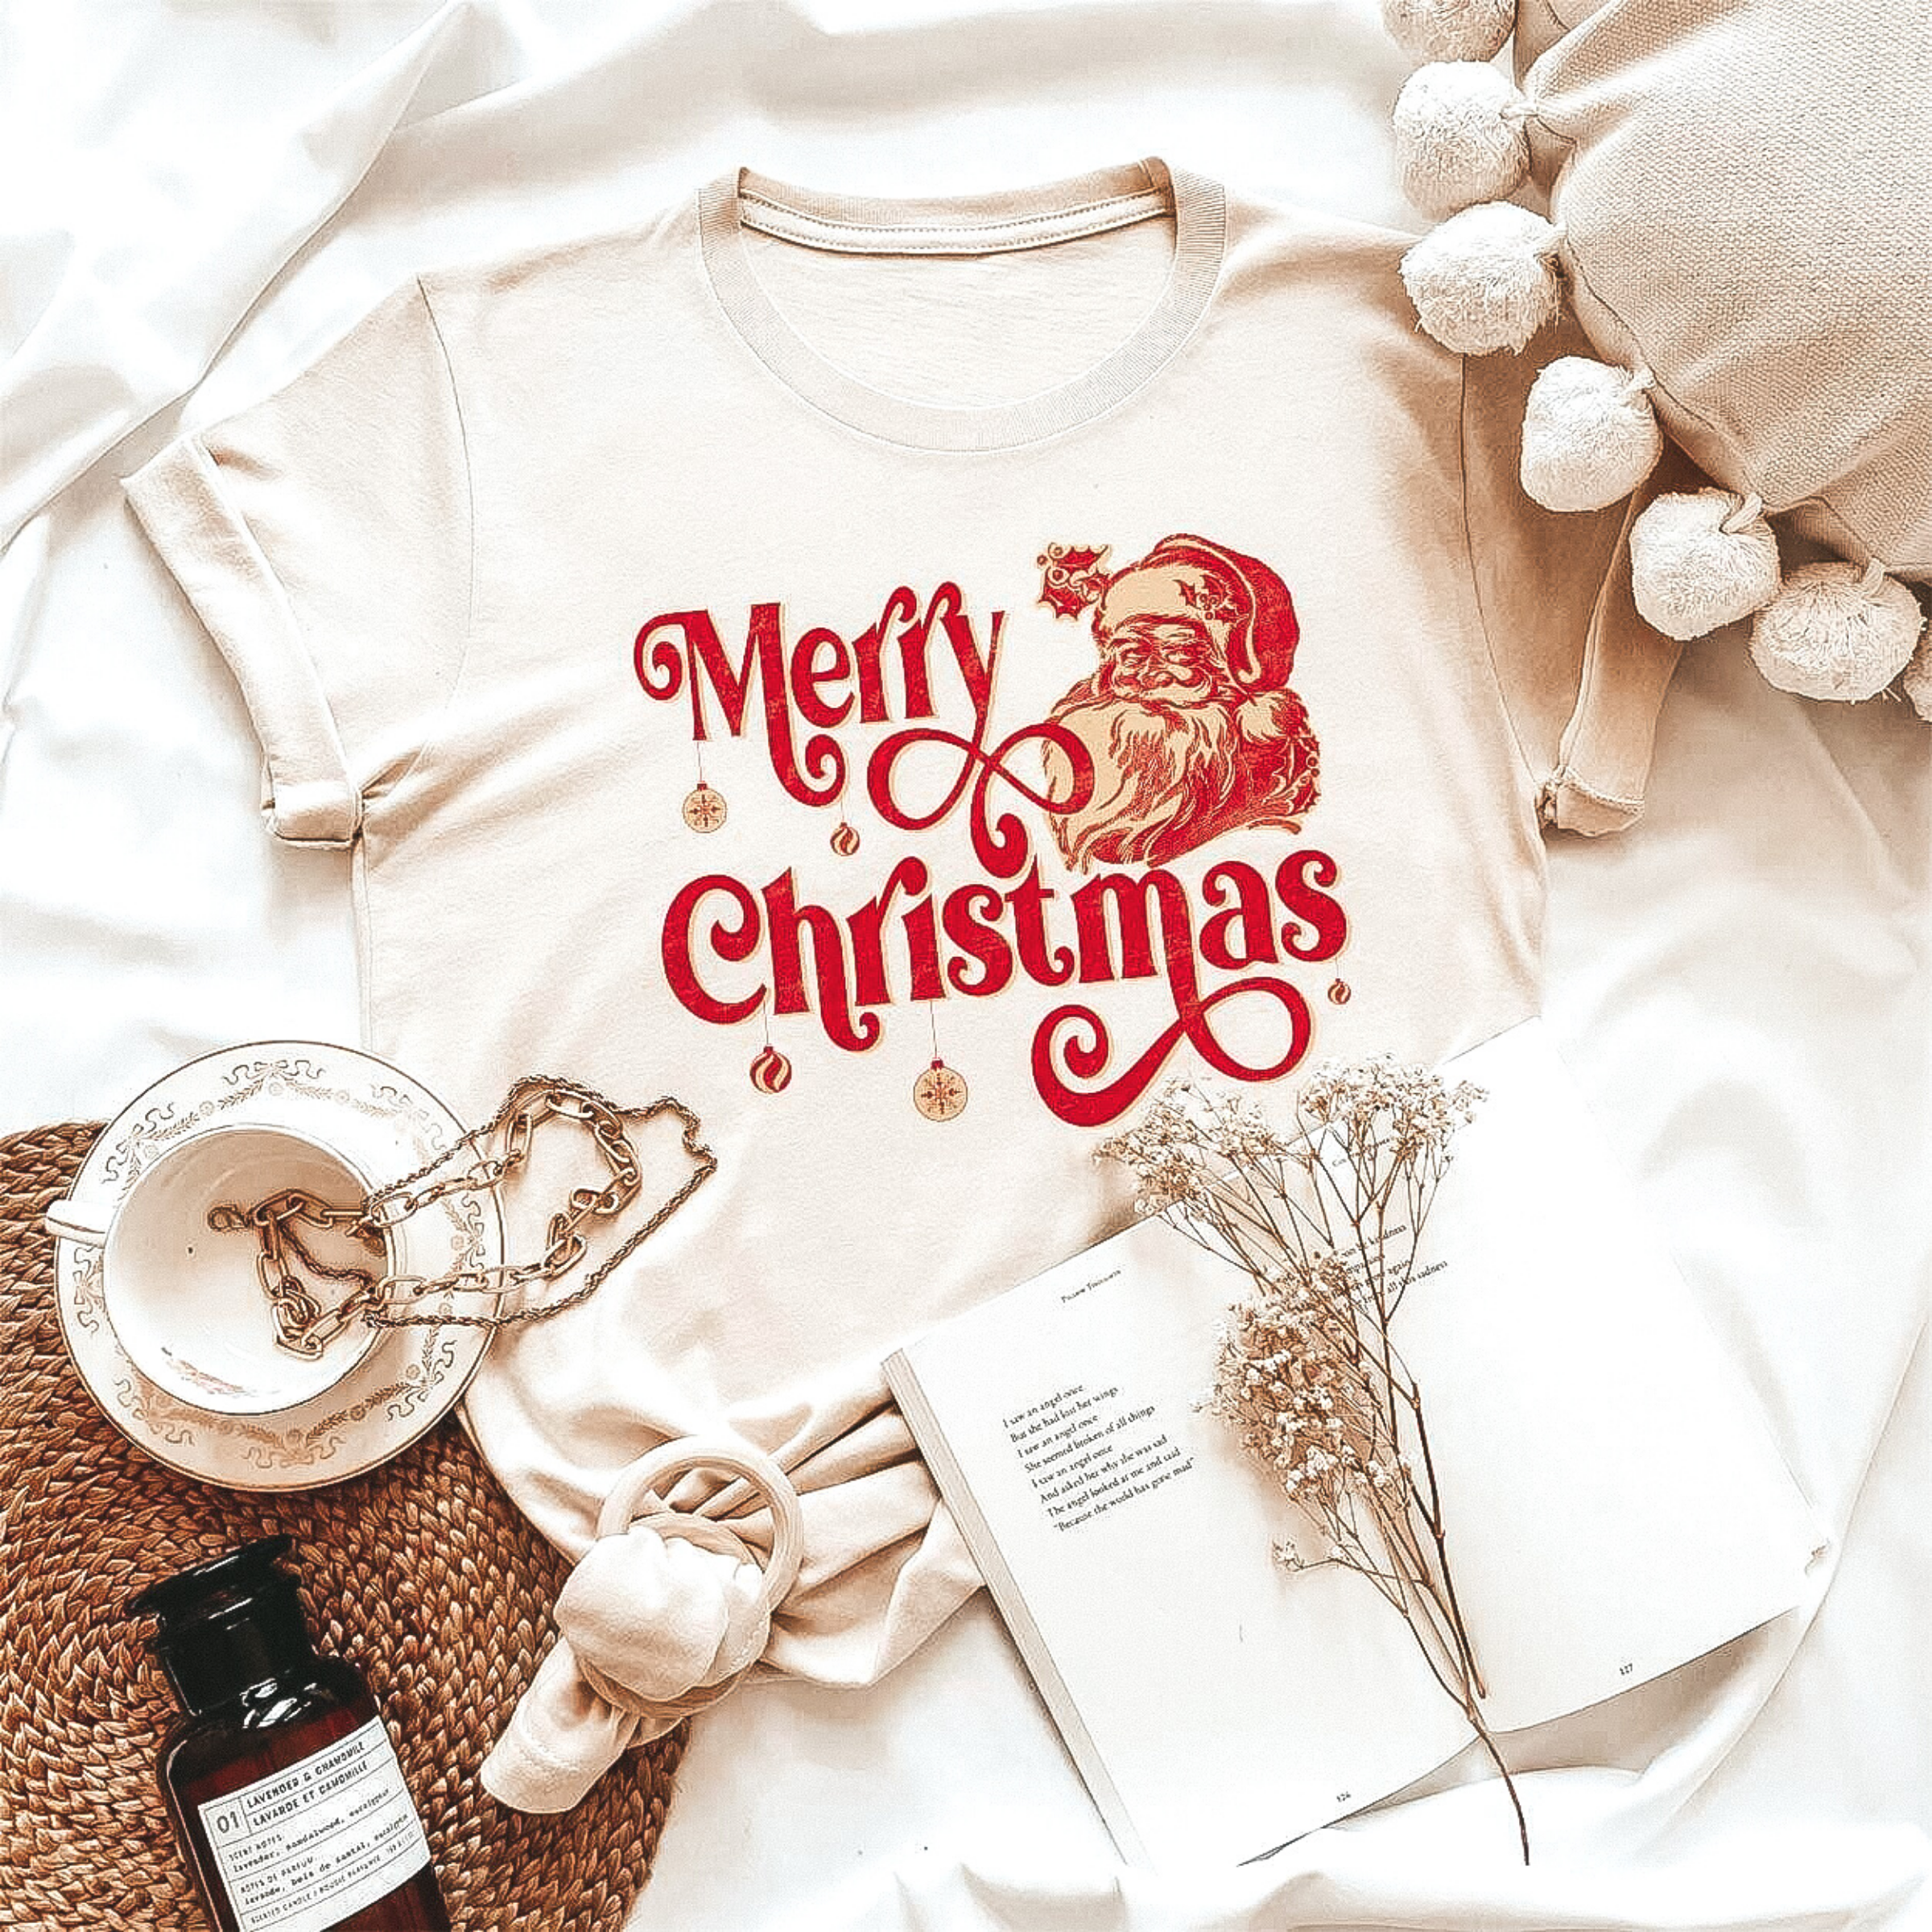 Short sleeve crew neck graphic tee with an image of Santa Clause's head and a graphic that says "Merry Christmas" with ornaments hanging off the letters.